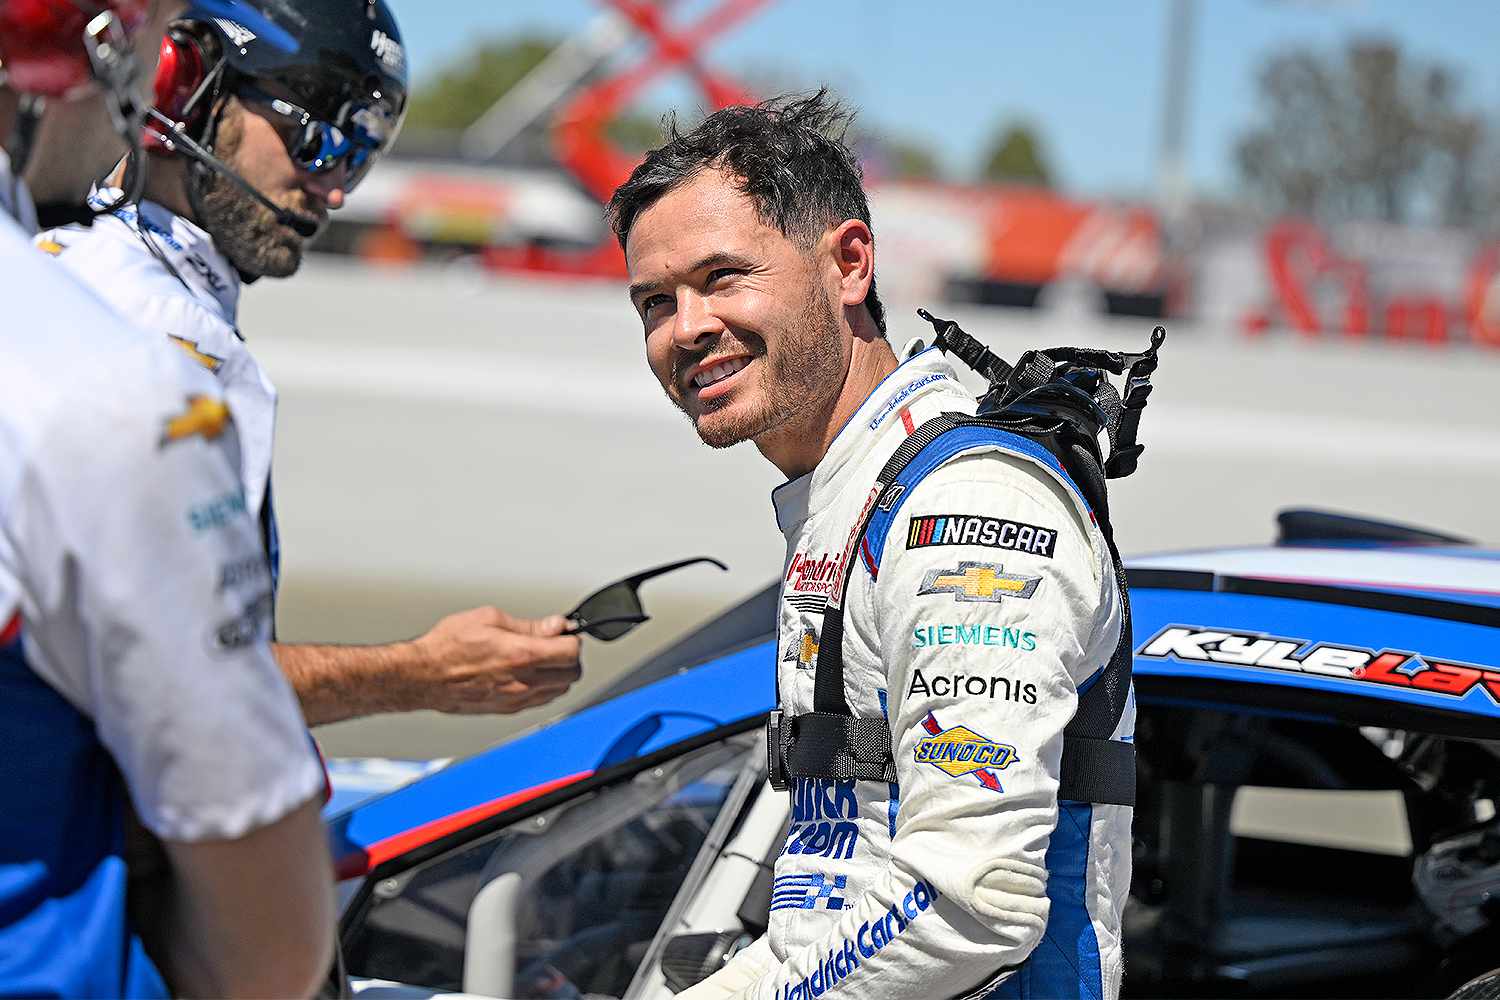 He Was Winning Everything..” Hendrick Motorsports Star Kyle Larson Once Revealed the Fallen From Grace NASCAR Driver Who Was “The Guy to Beat” While He Was Growing Up